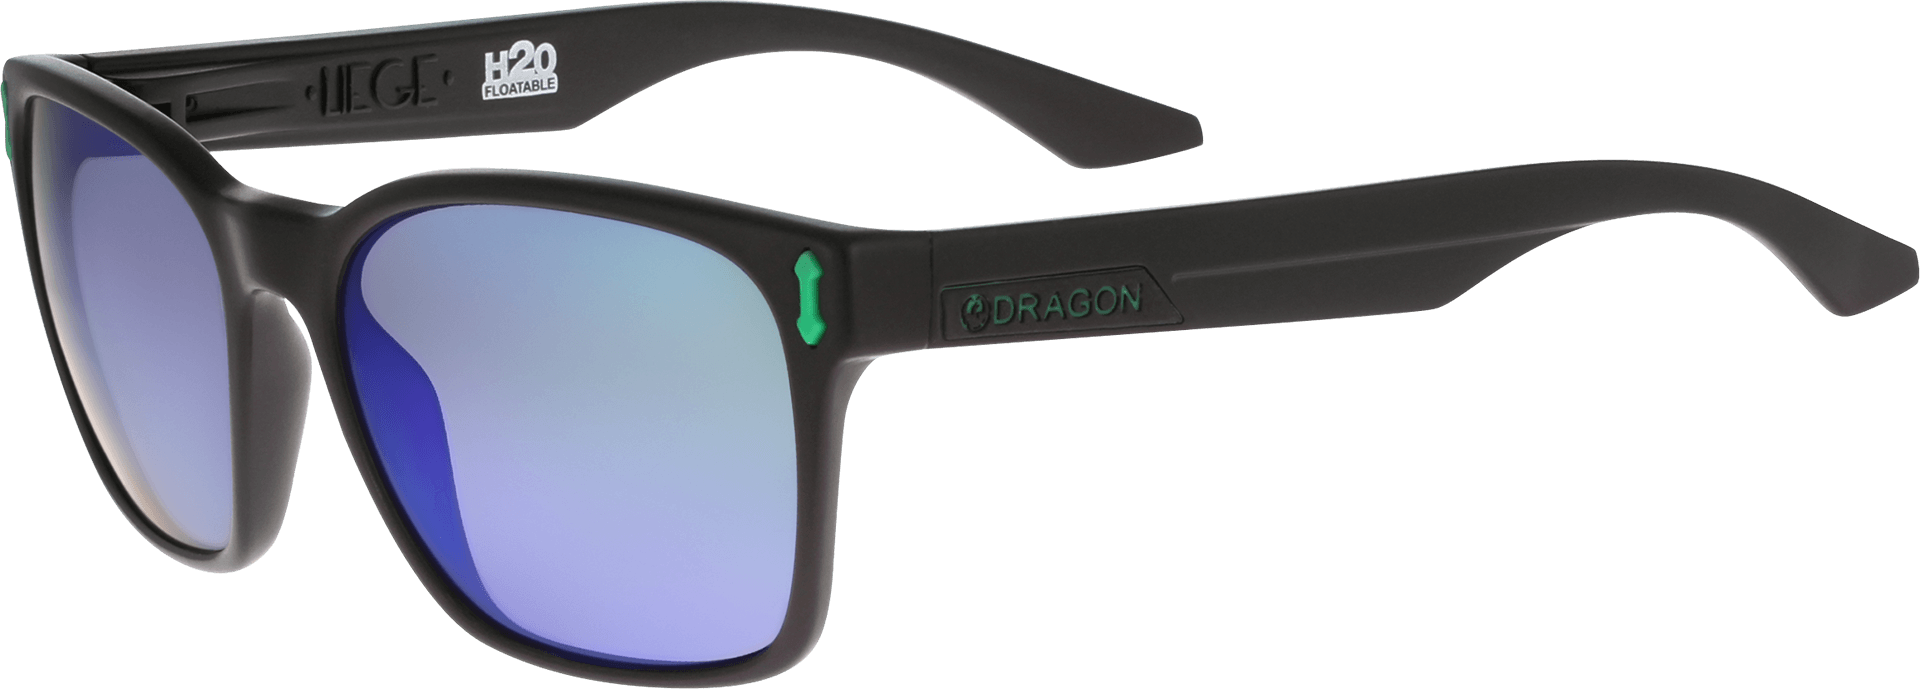 Float on with these unsinkable sunglasses from Dragon Alliance